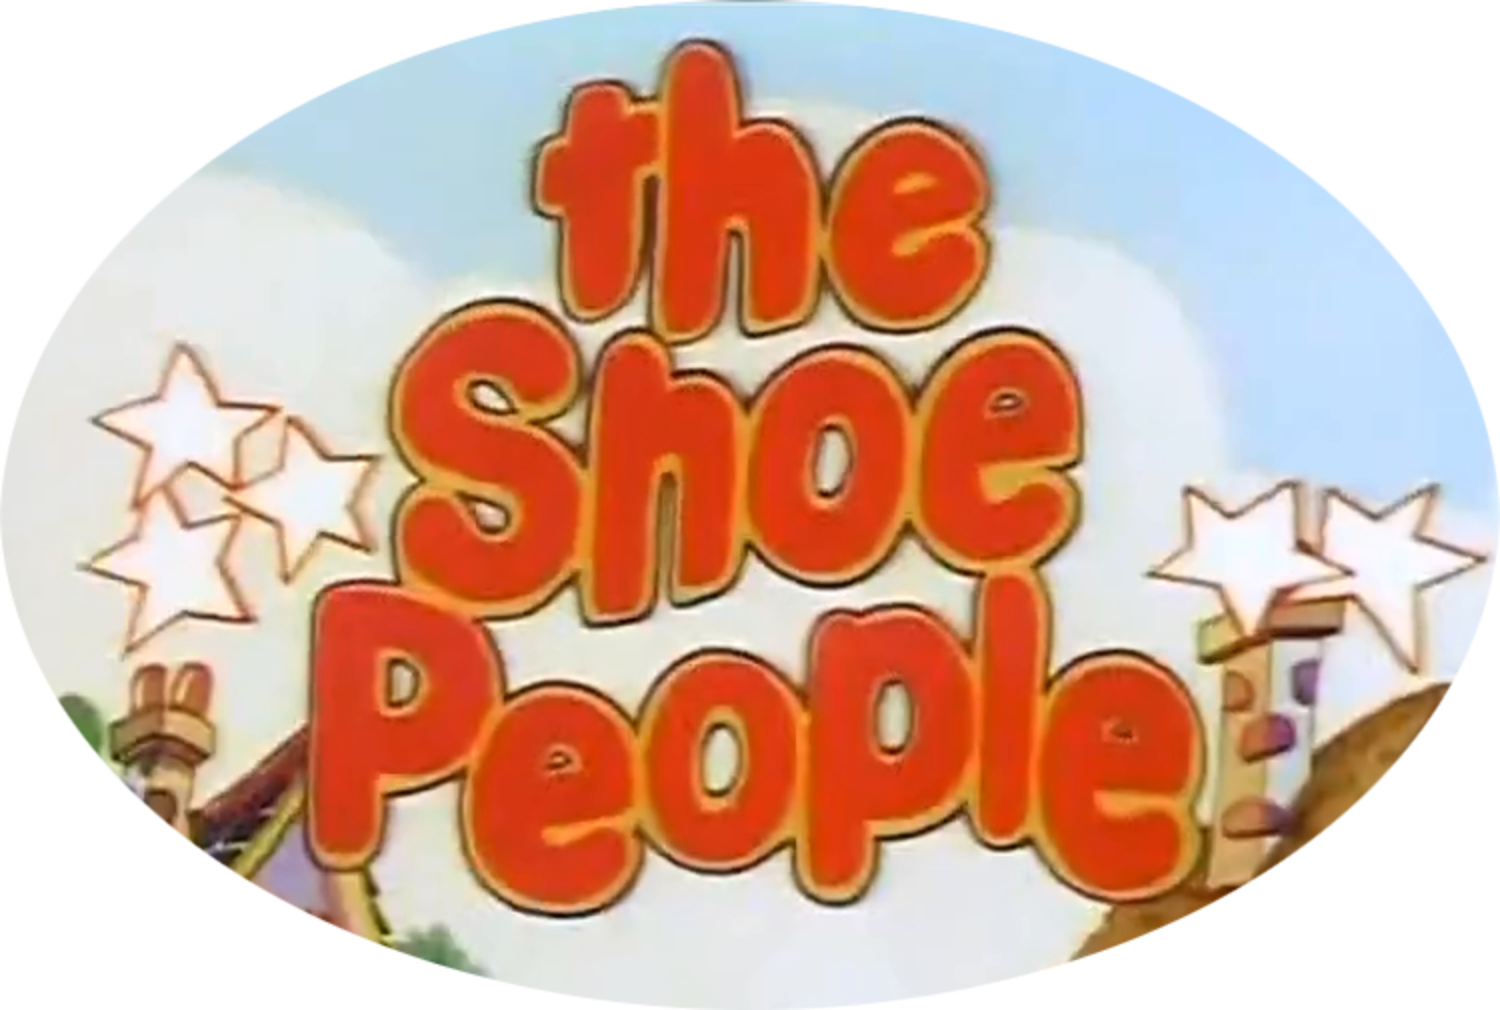 The Shoe People 